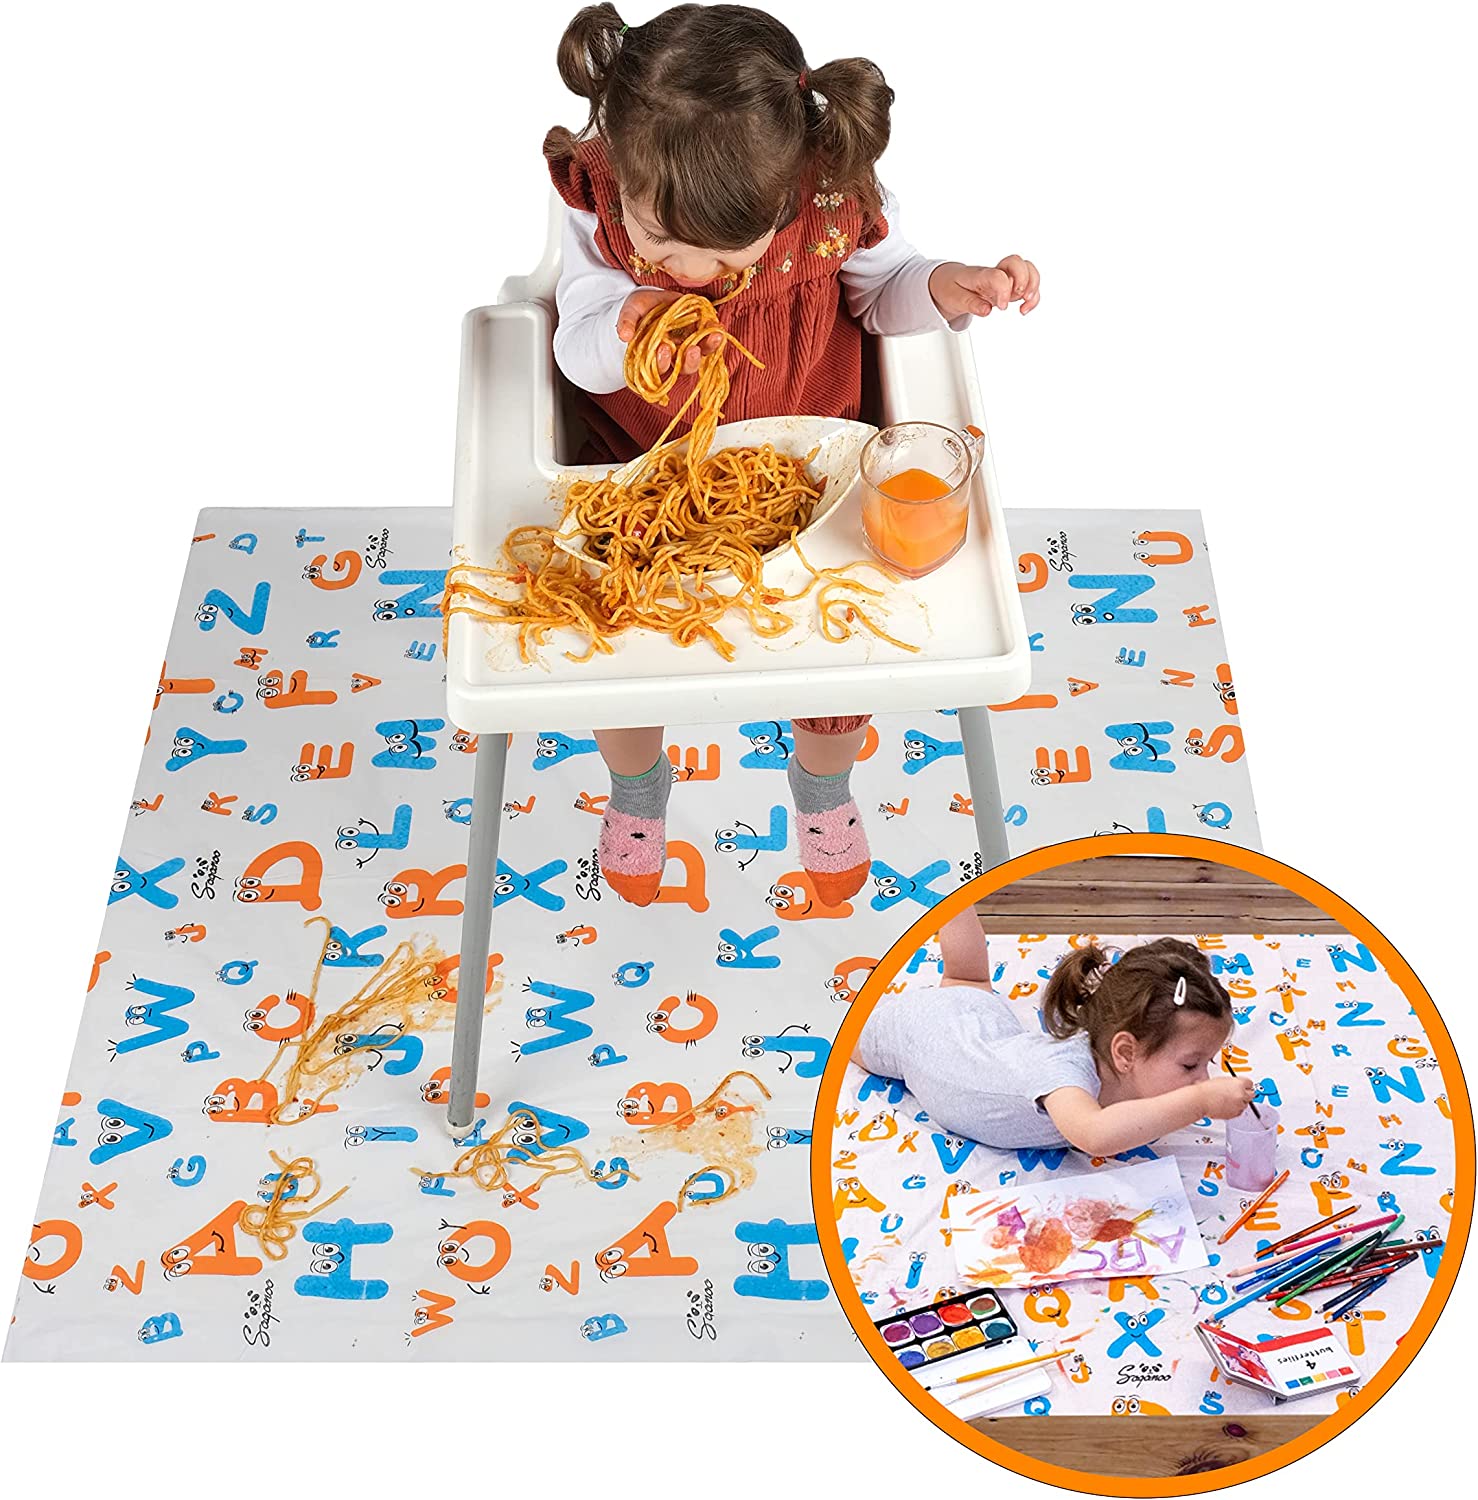 Disposable Baby Splat Mats for Under High Chair